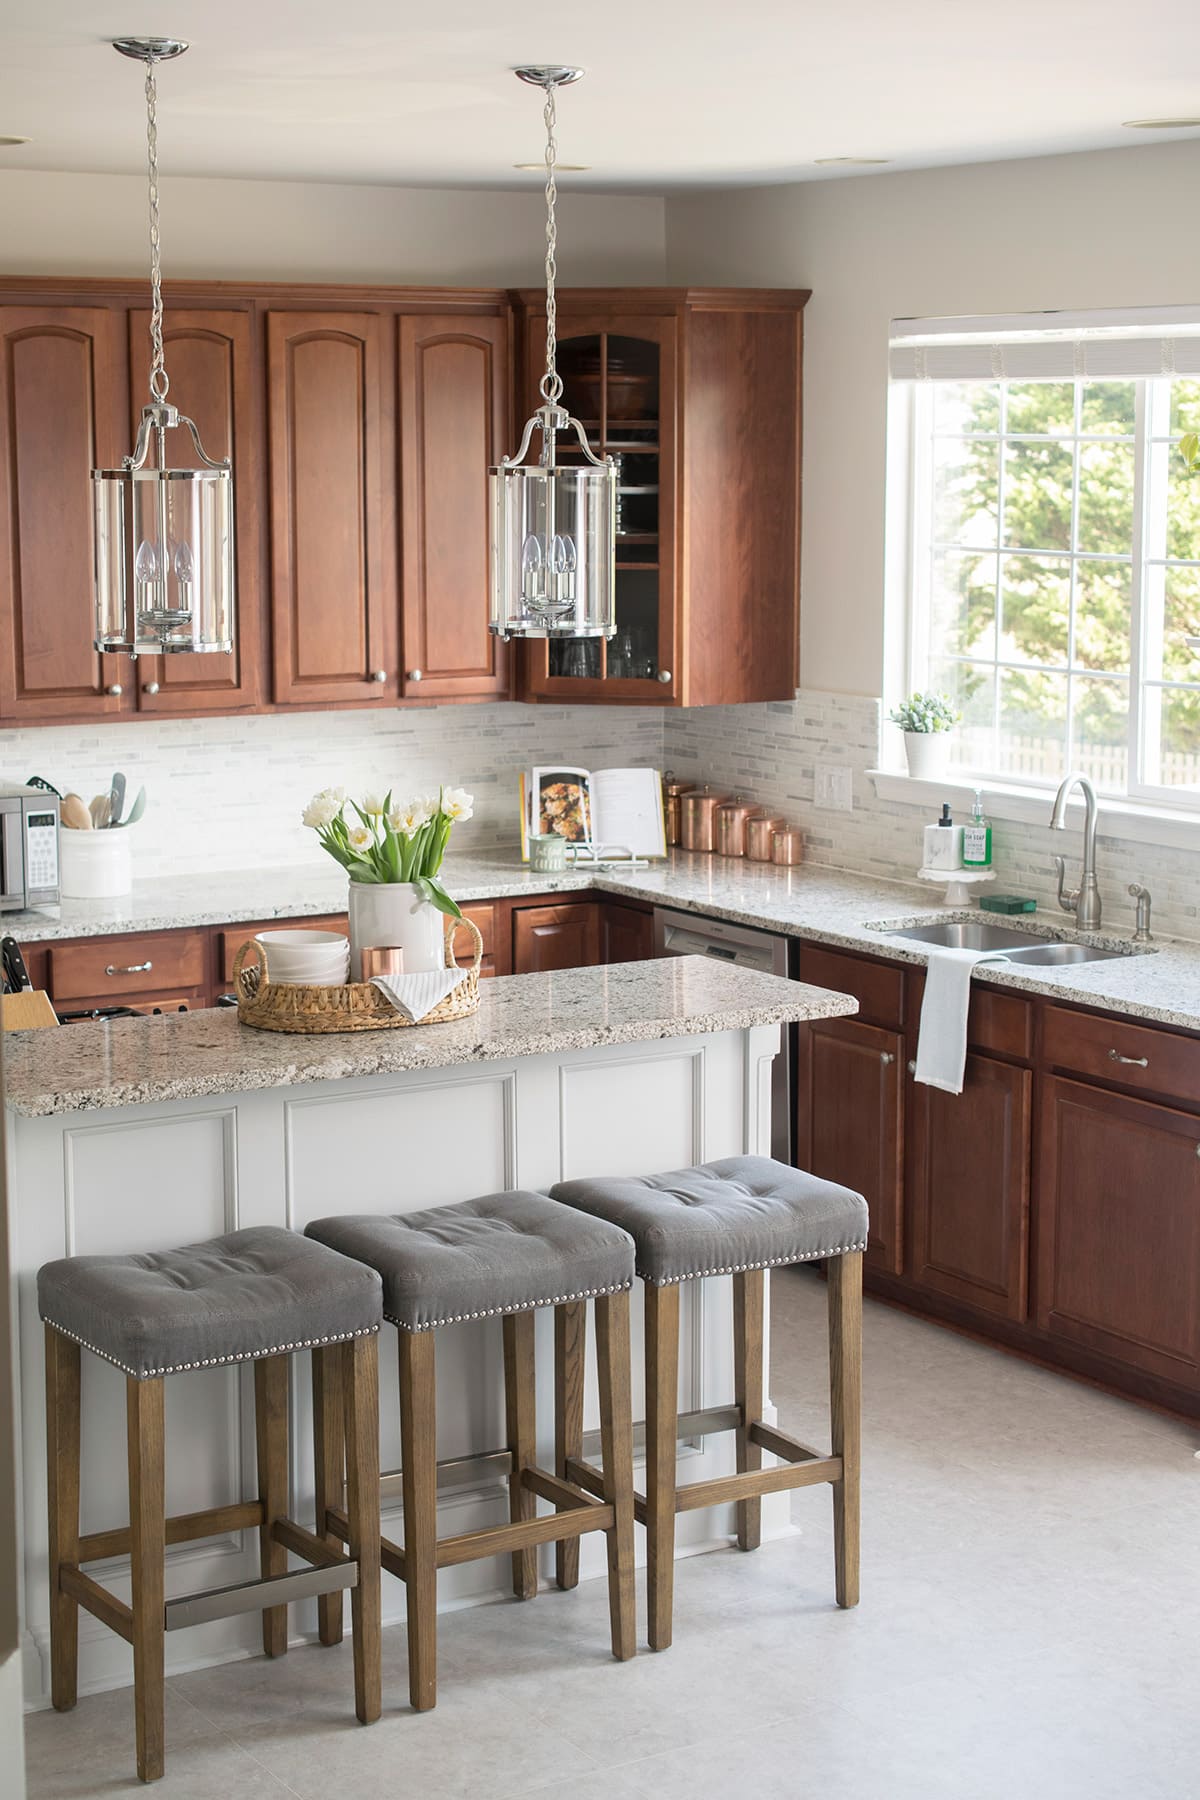 Traditional Kitchen Decorating and Remodel. This grey kitchen includes white granite, dark cabinets, marble backsplash, and a two level island.